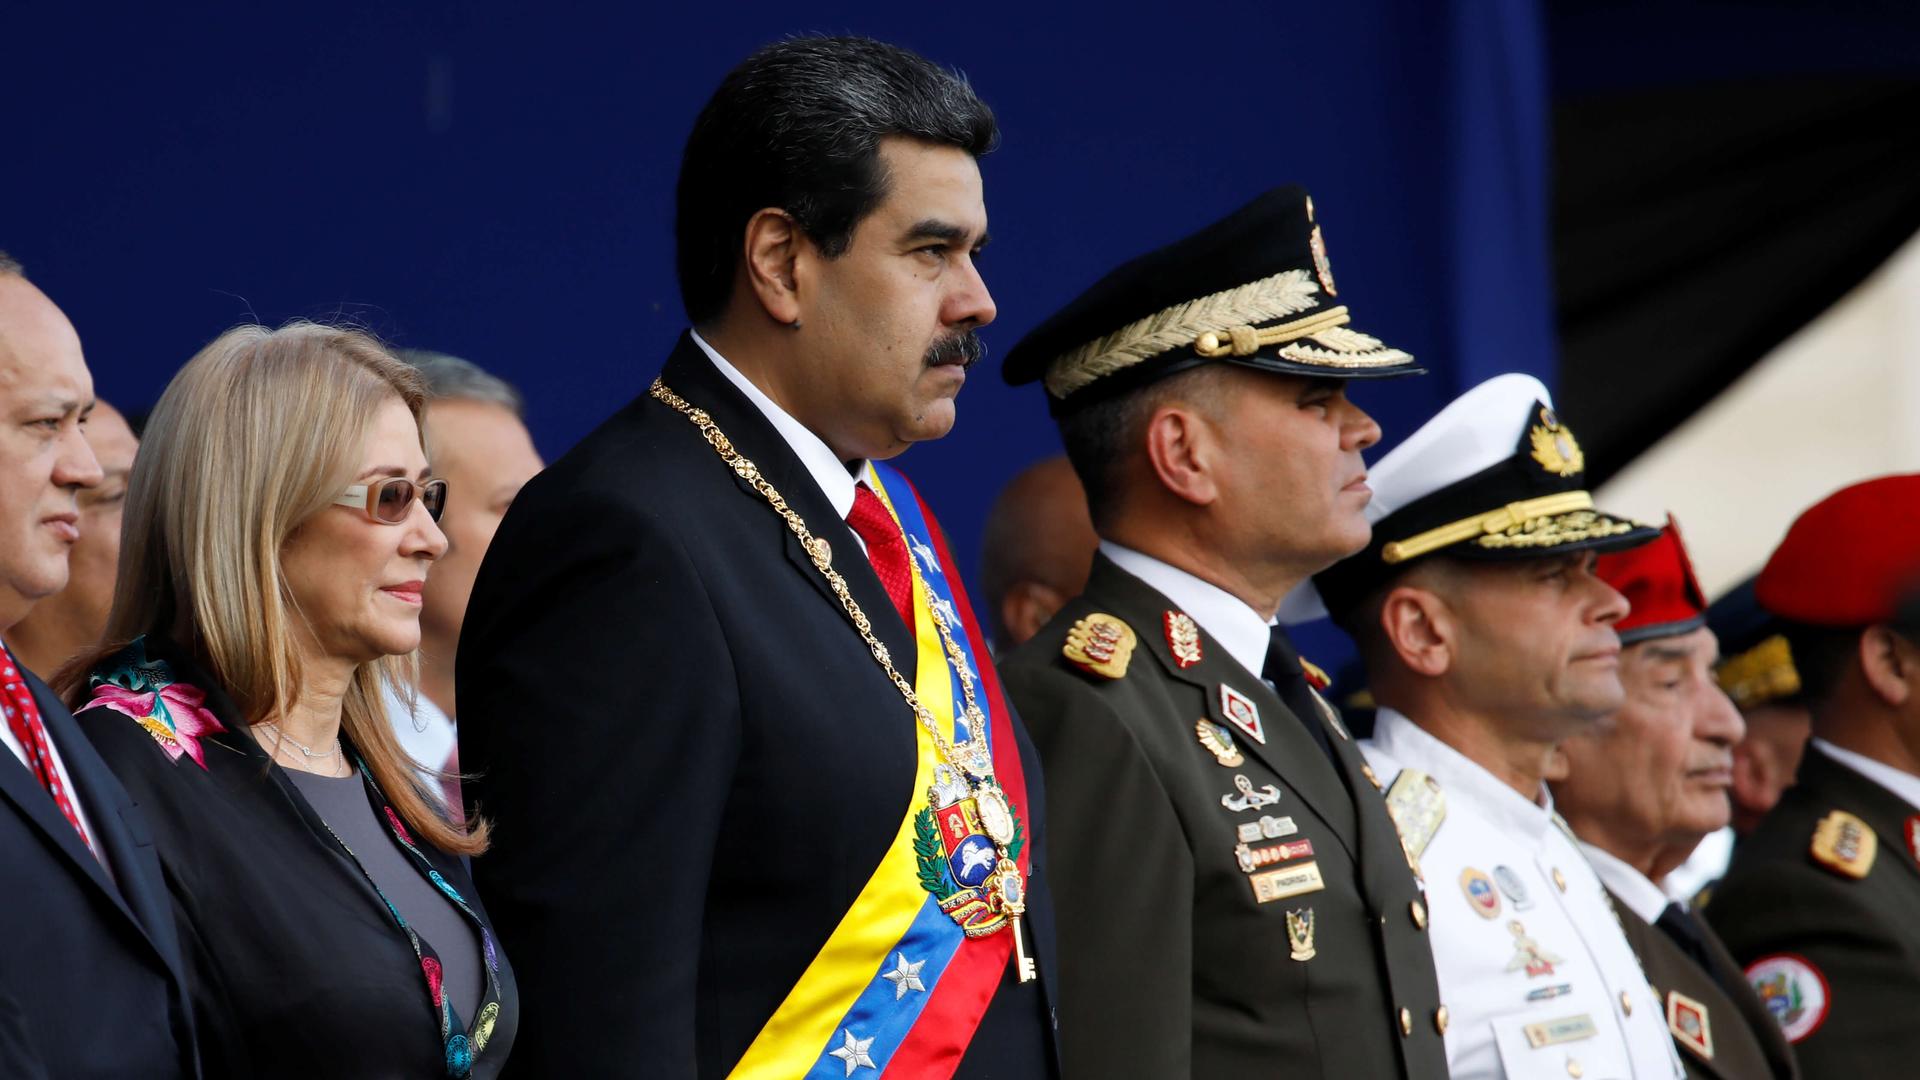 President Nicolas Maduro attends a ceremony in a suit and sash 